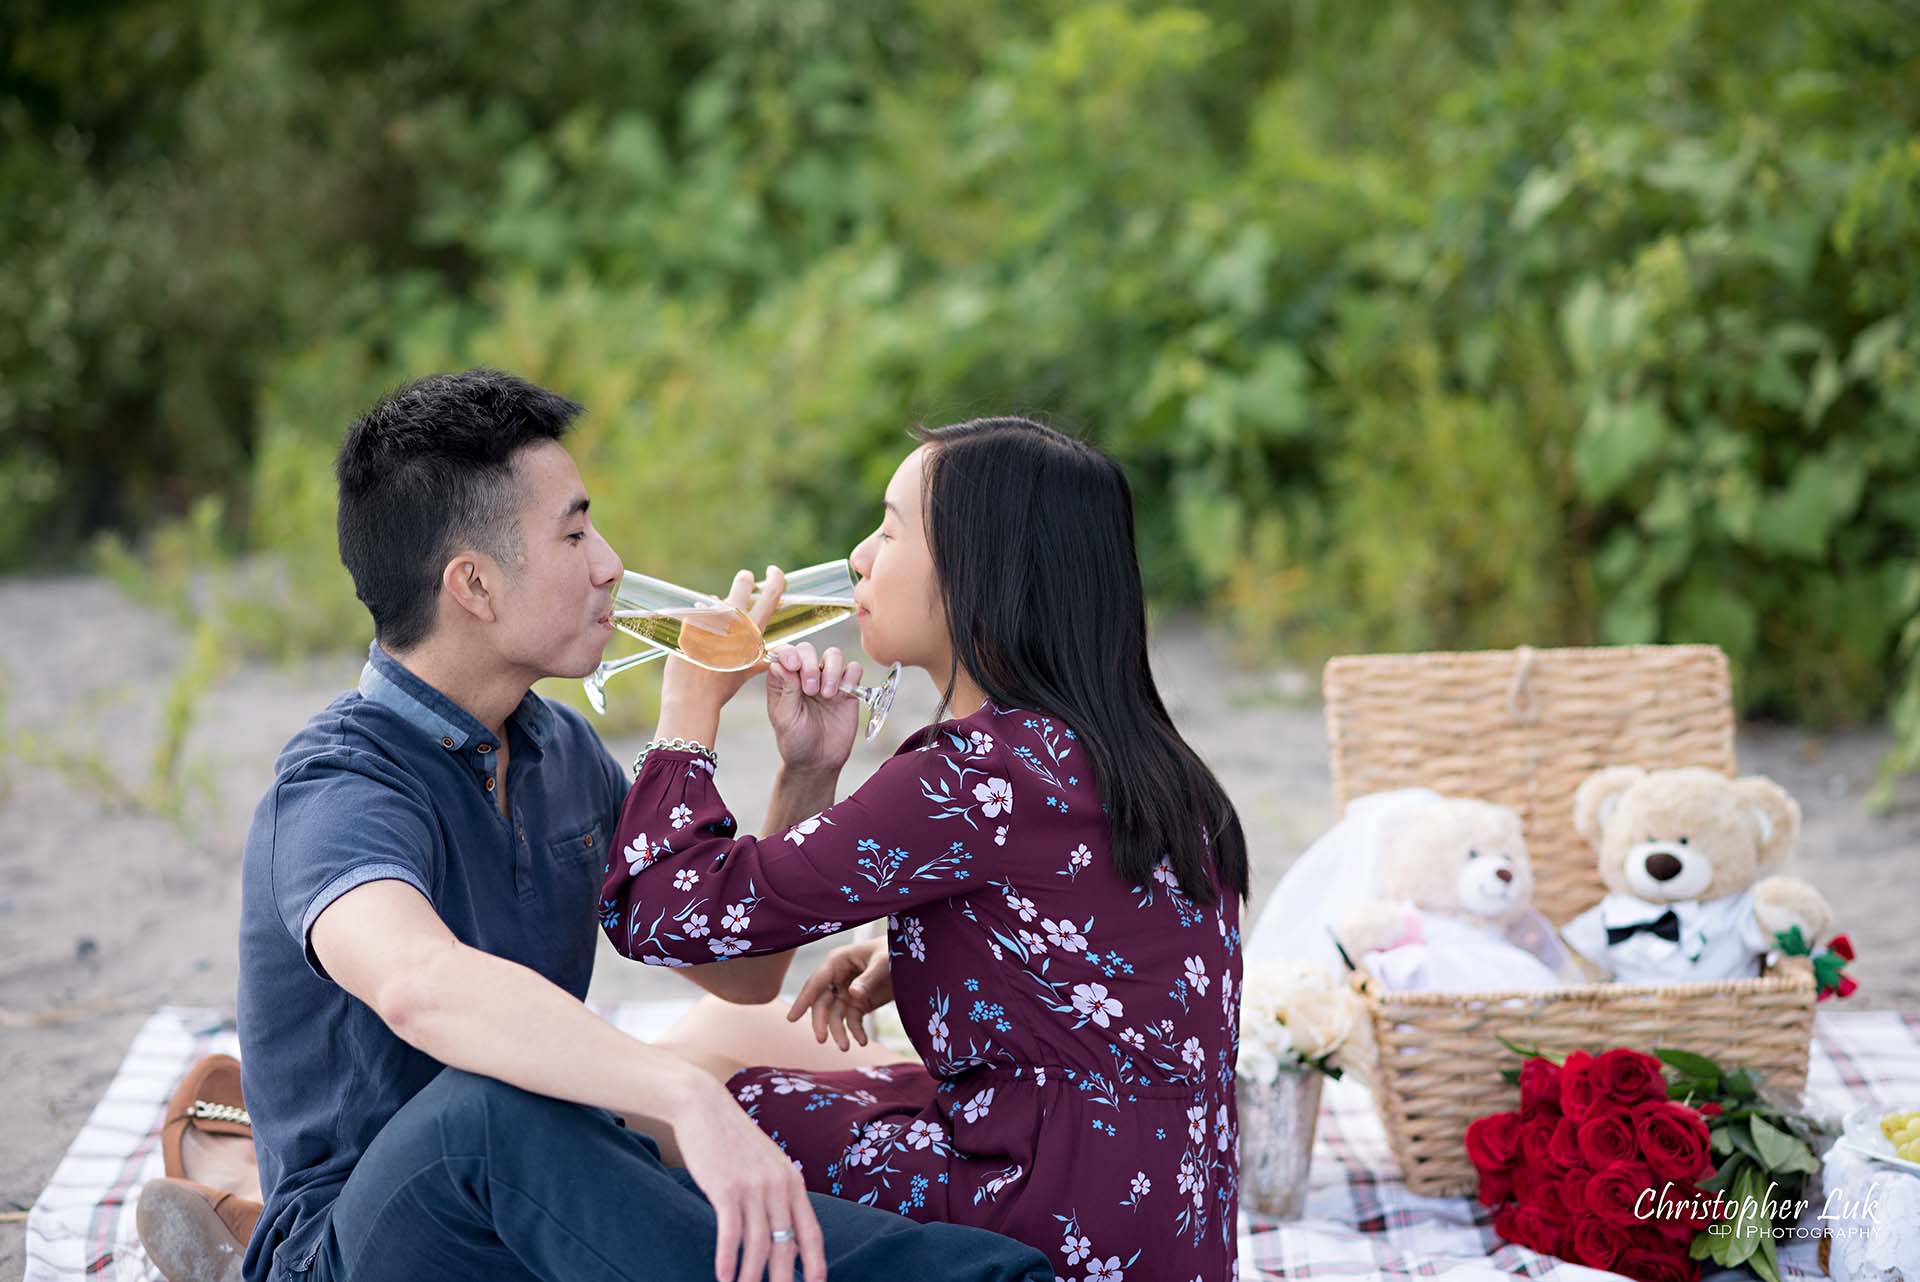 Christopher Luk Toronto Photographer Scarborough Bluffs Beach Park Sunset Surprise Wedding Marriage Engagement Proposal Candid Natural Photojournalistic Bride Groom Picnic Blanket Basket Teddy Bears Champagne Glasses Flutes Drinking Together Smile